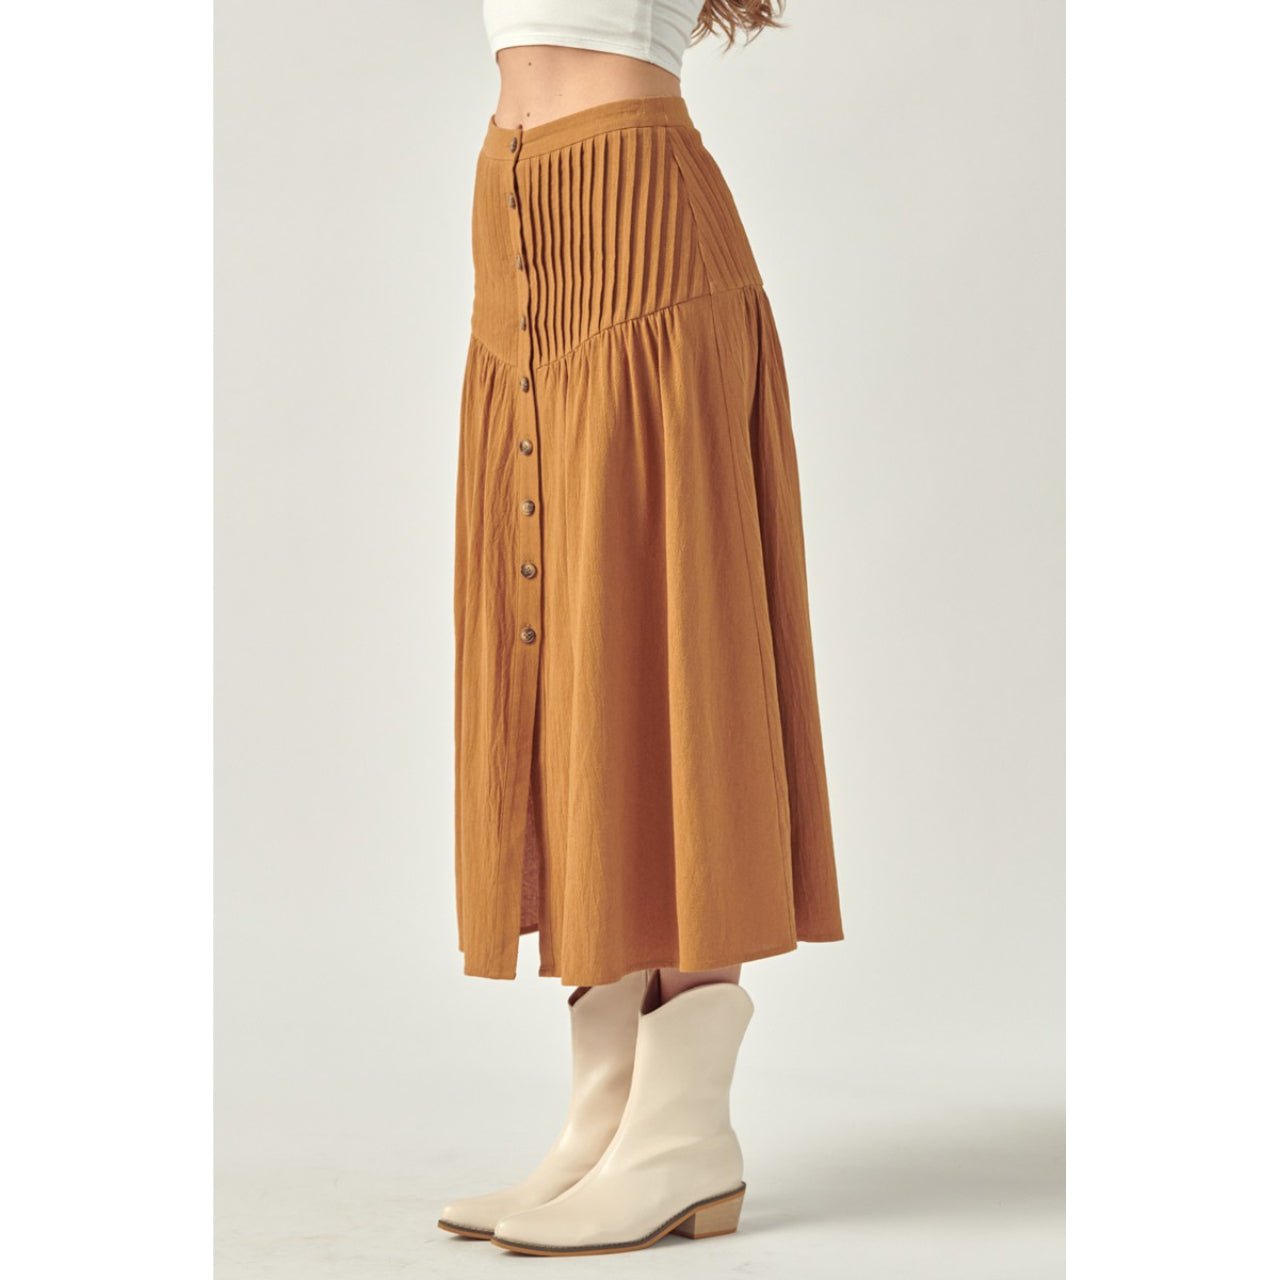 Carmella Carmel Button Down Long Lined Pleated Skirt - The Graphic Tee